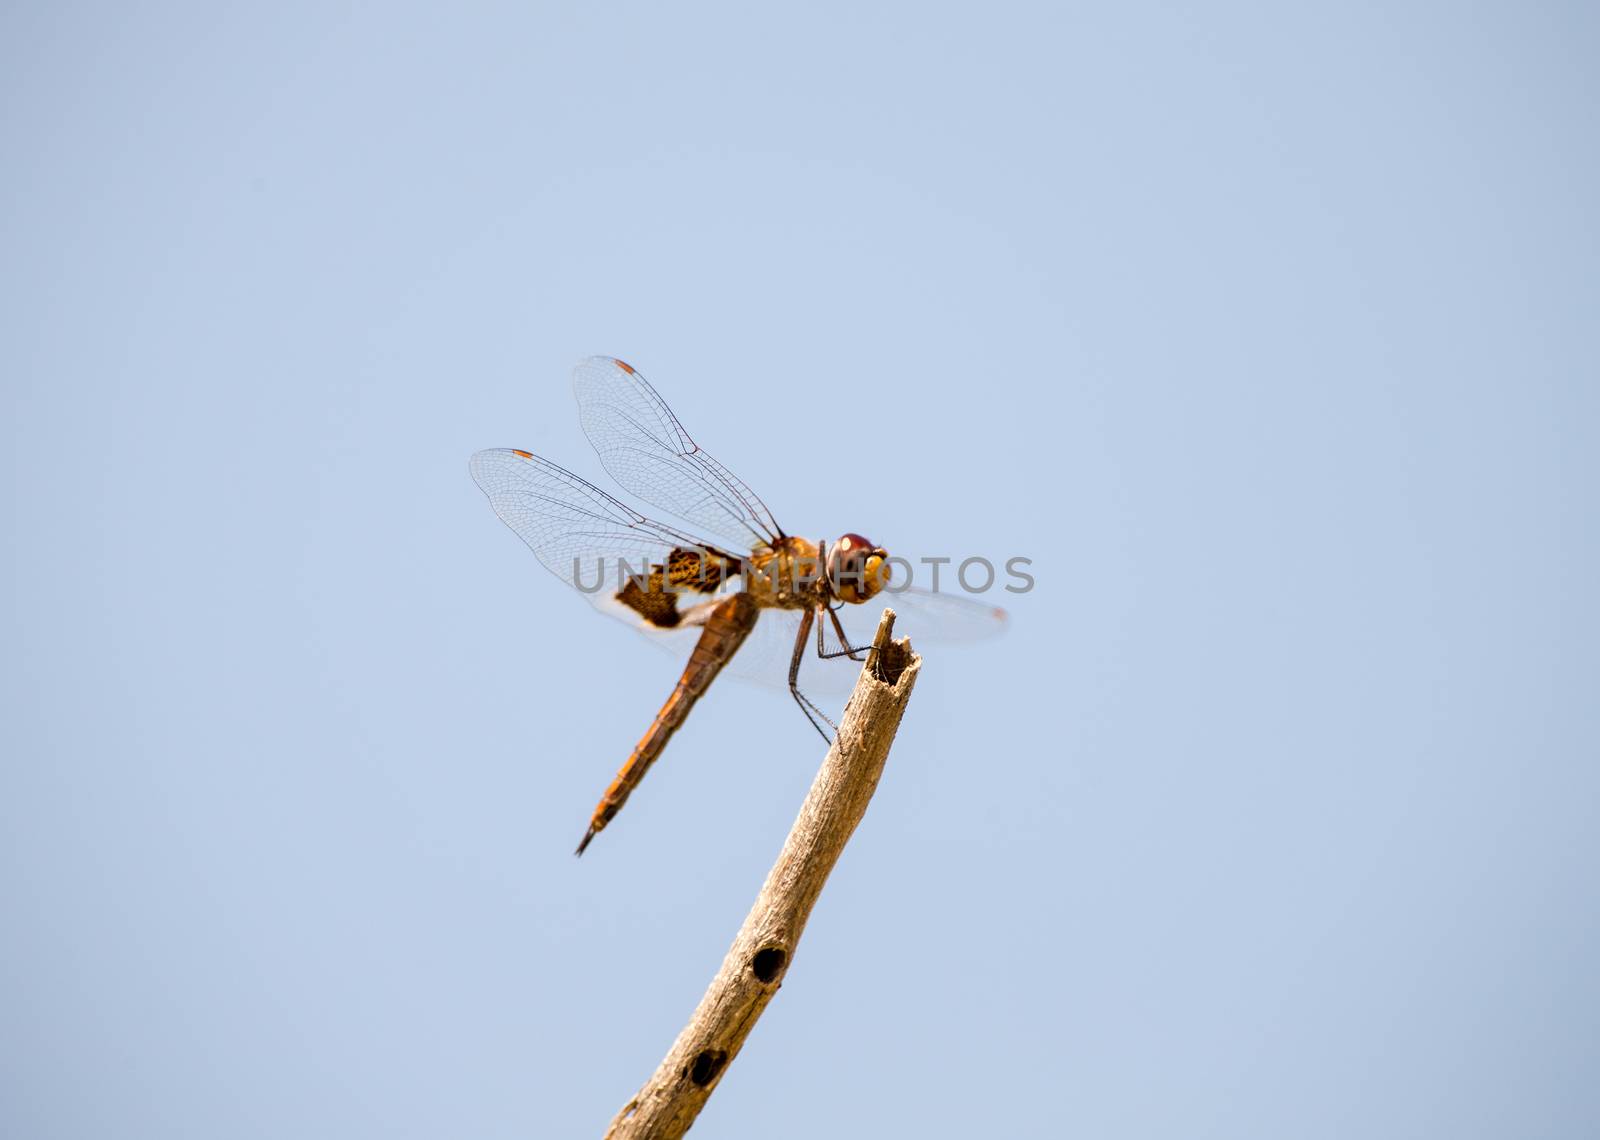 Dragonfly by thomas_males